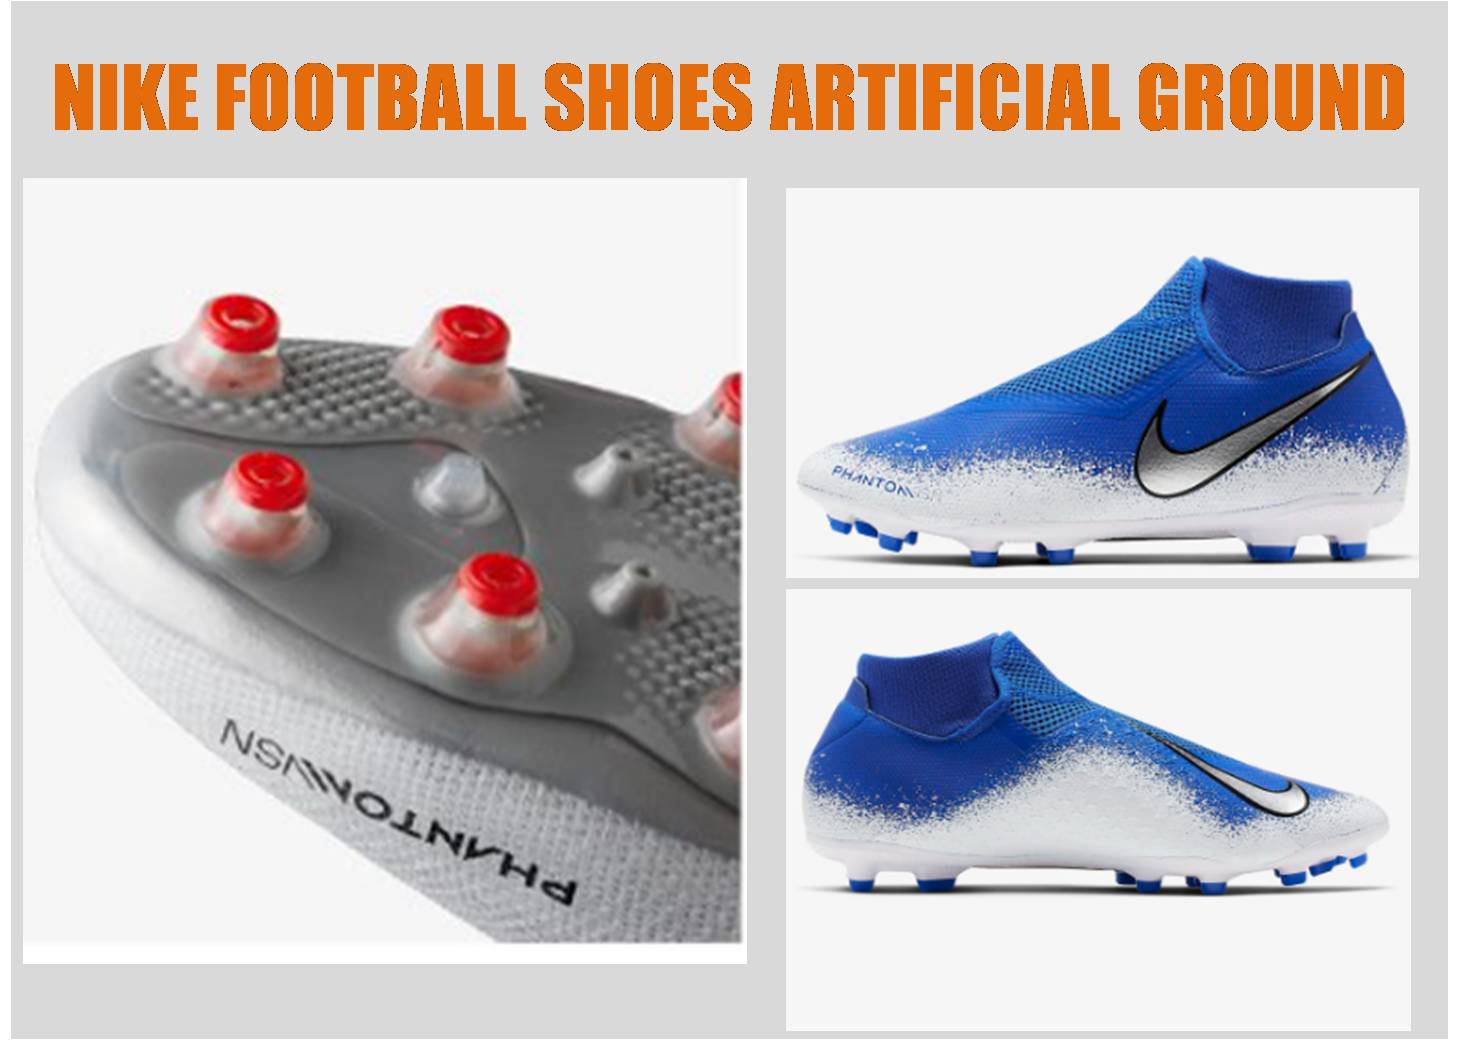 NIKE_FOOTBALL_SHOES_FOR_ARTIFICIAL_GROUND